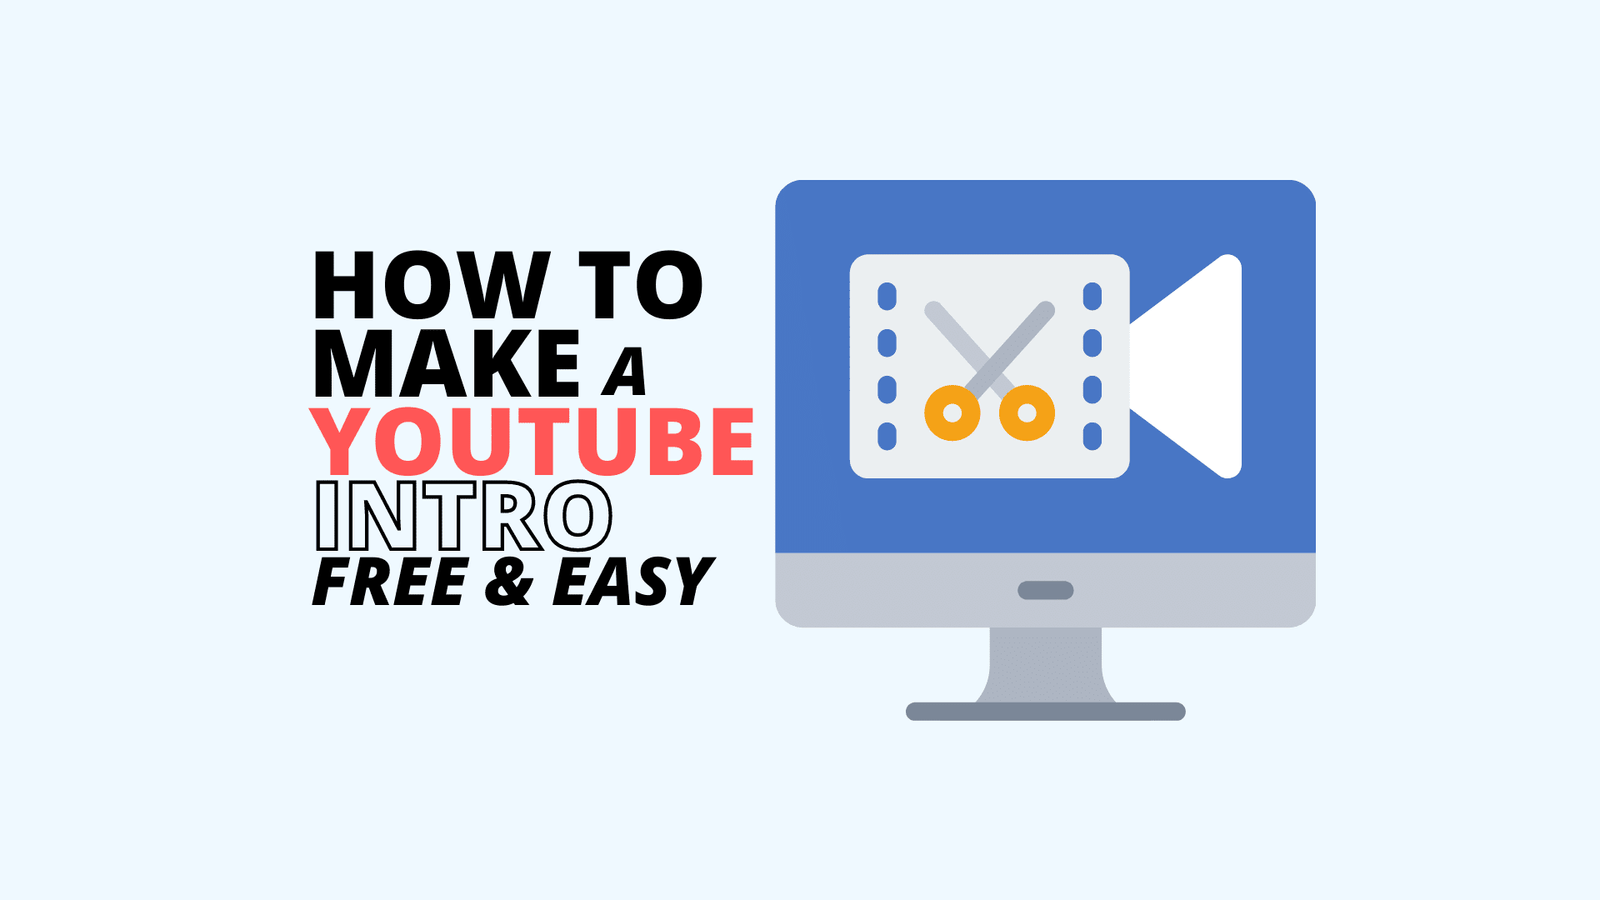 How To Make a YouTube Intro Free and Easy